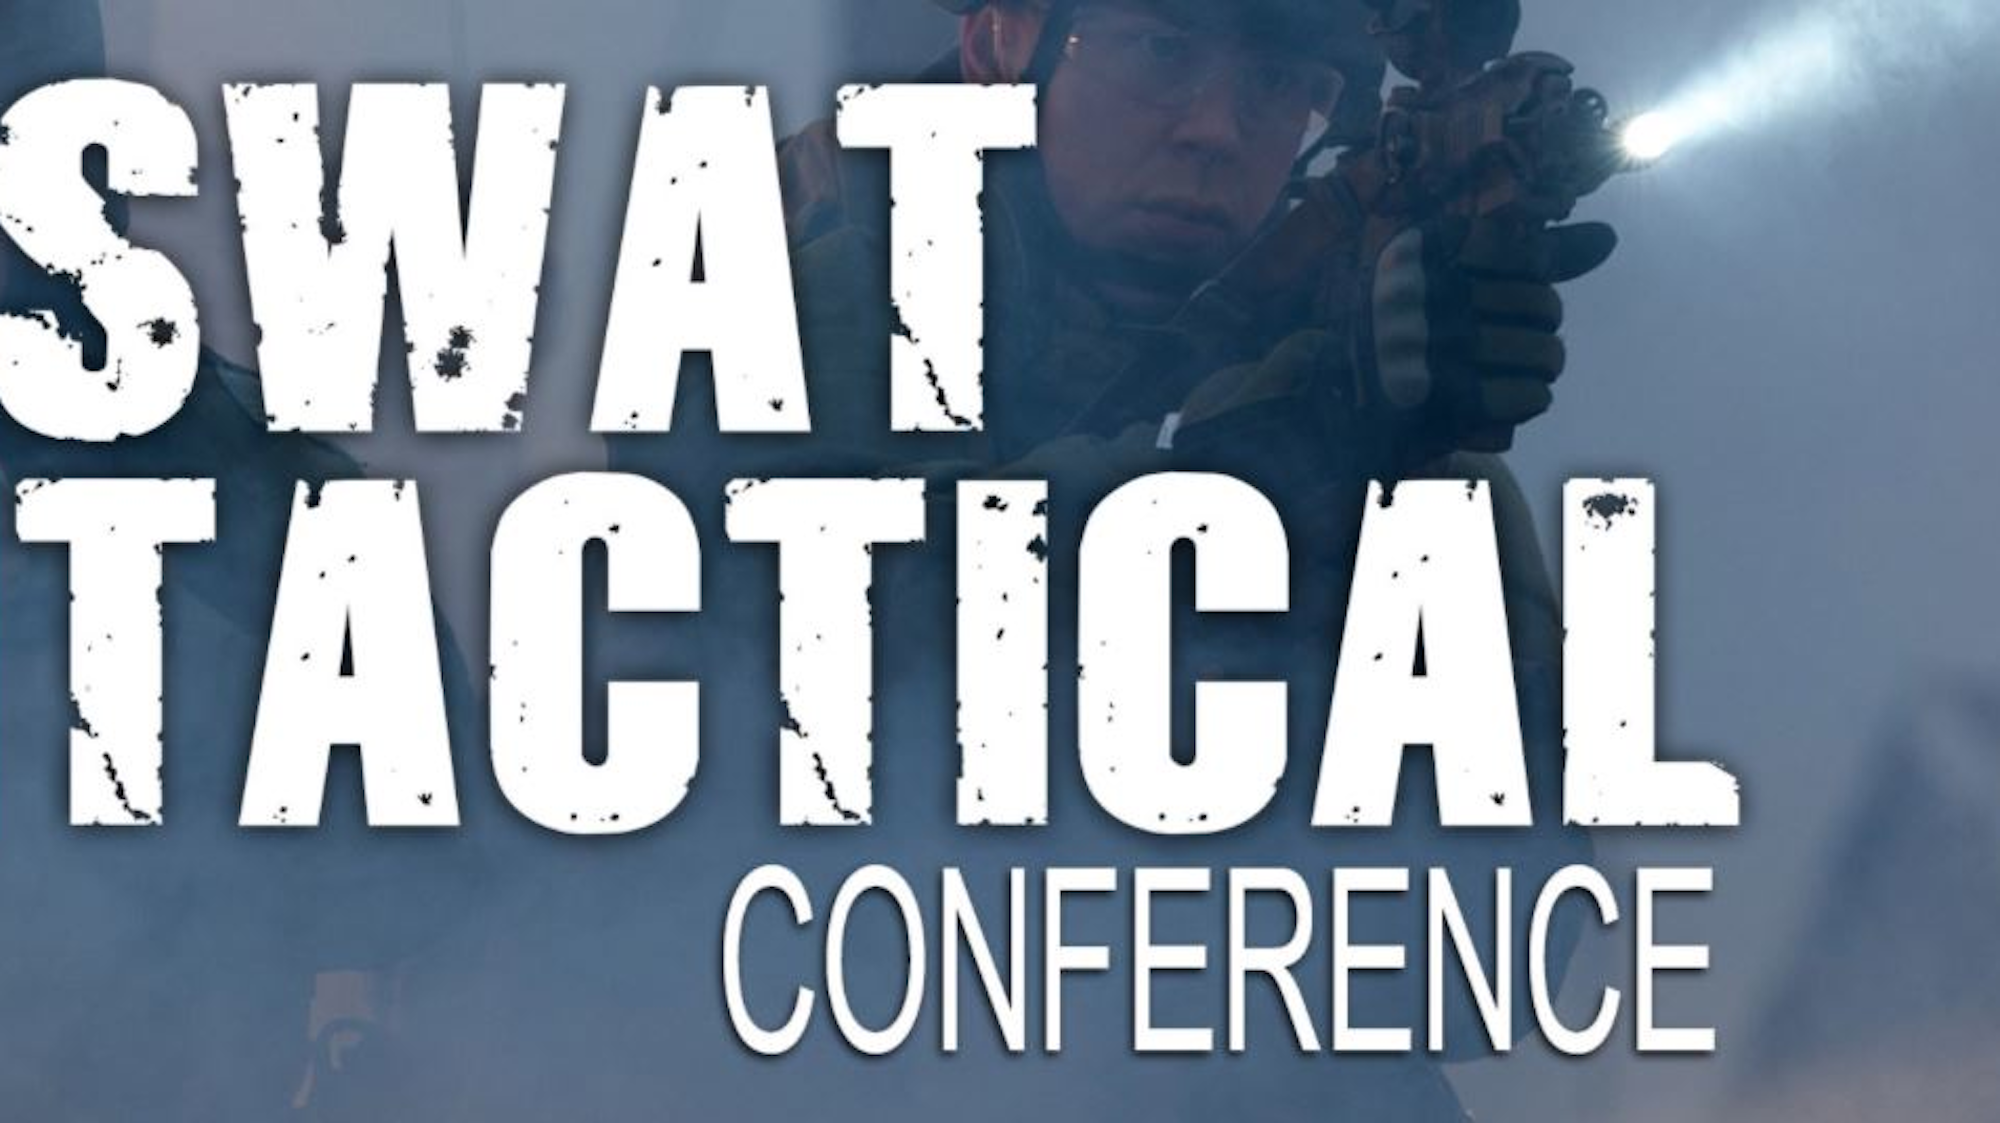 S.W.A.T. Tactical Training Conference & Expo 2021 Officer